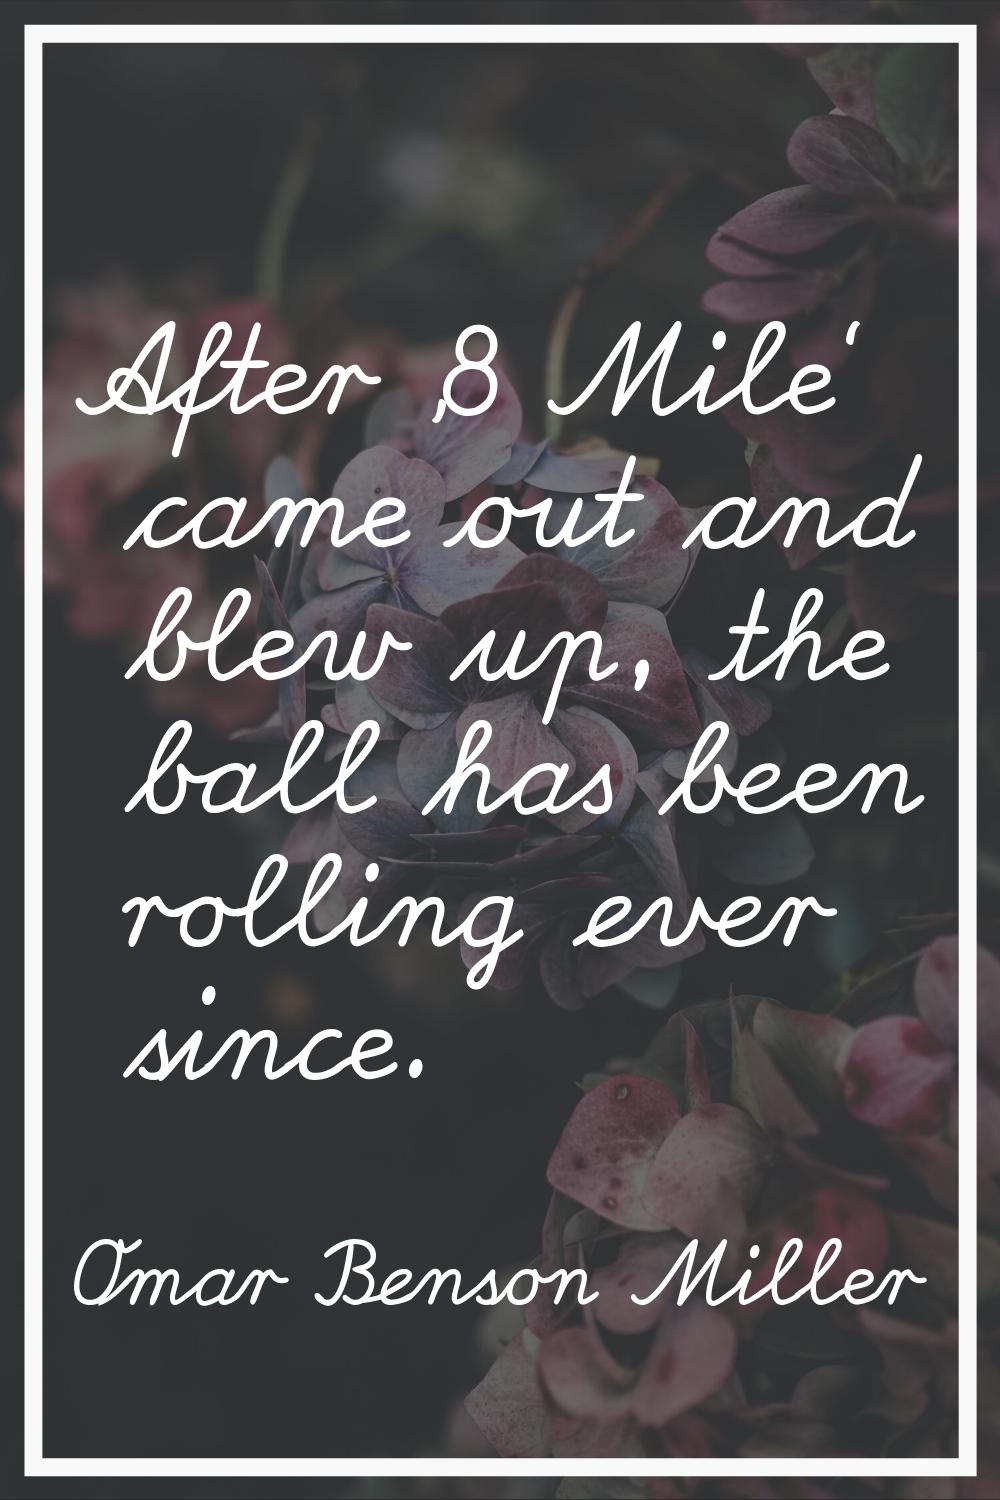 After '8 Mile' came out and blew up, the ball has been rolling ever since.